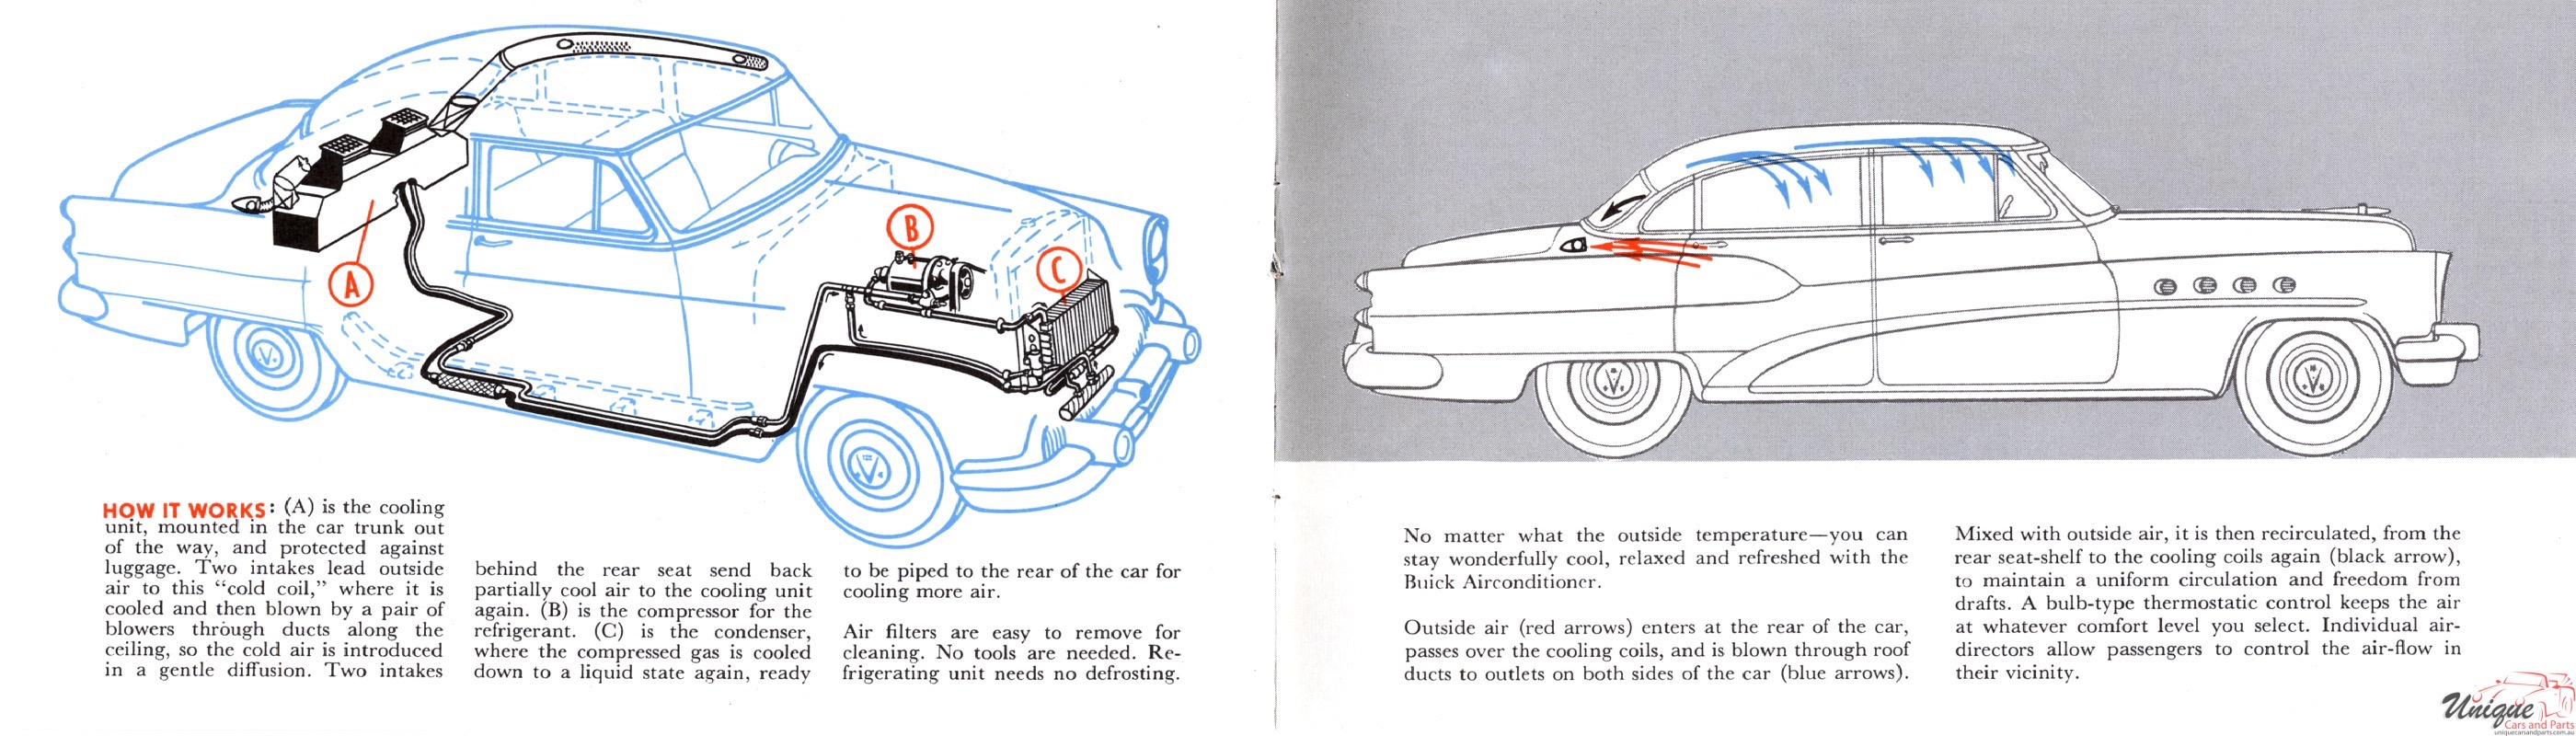 1953 Buick Heating And Air-Conditioning Folder Page 6